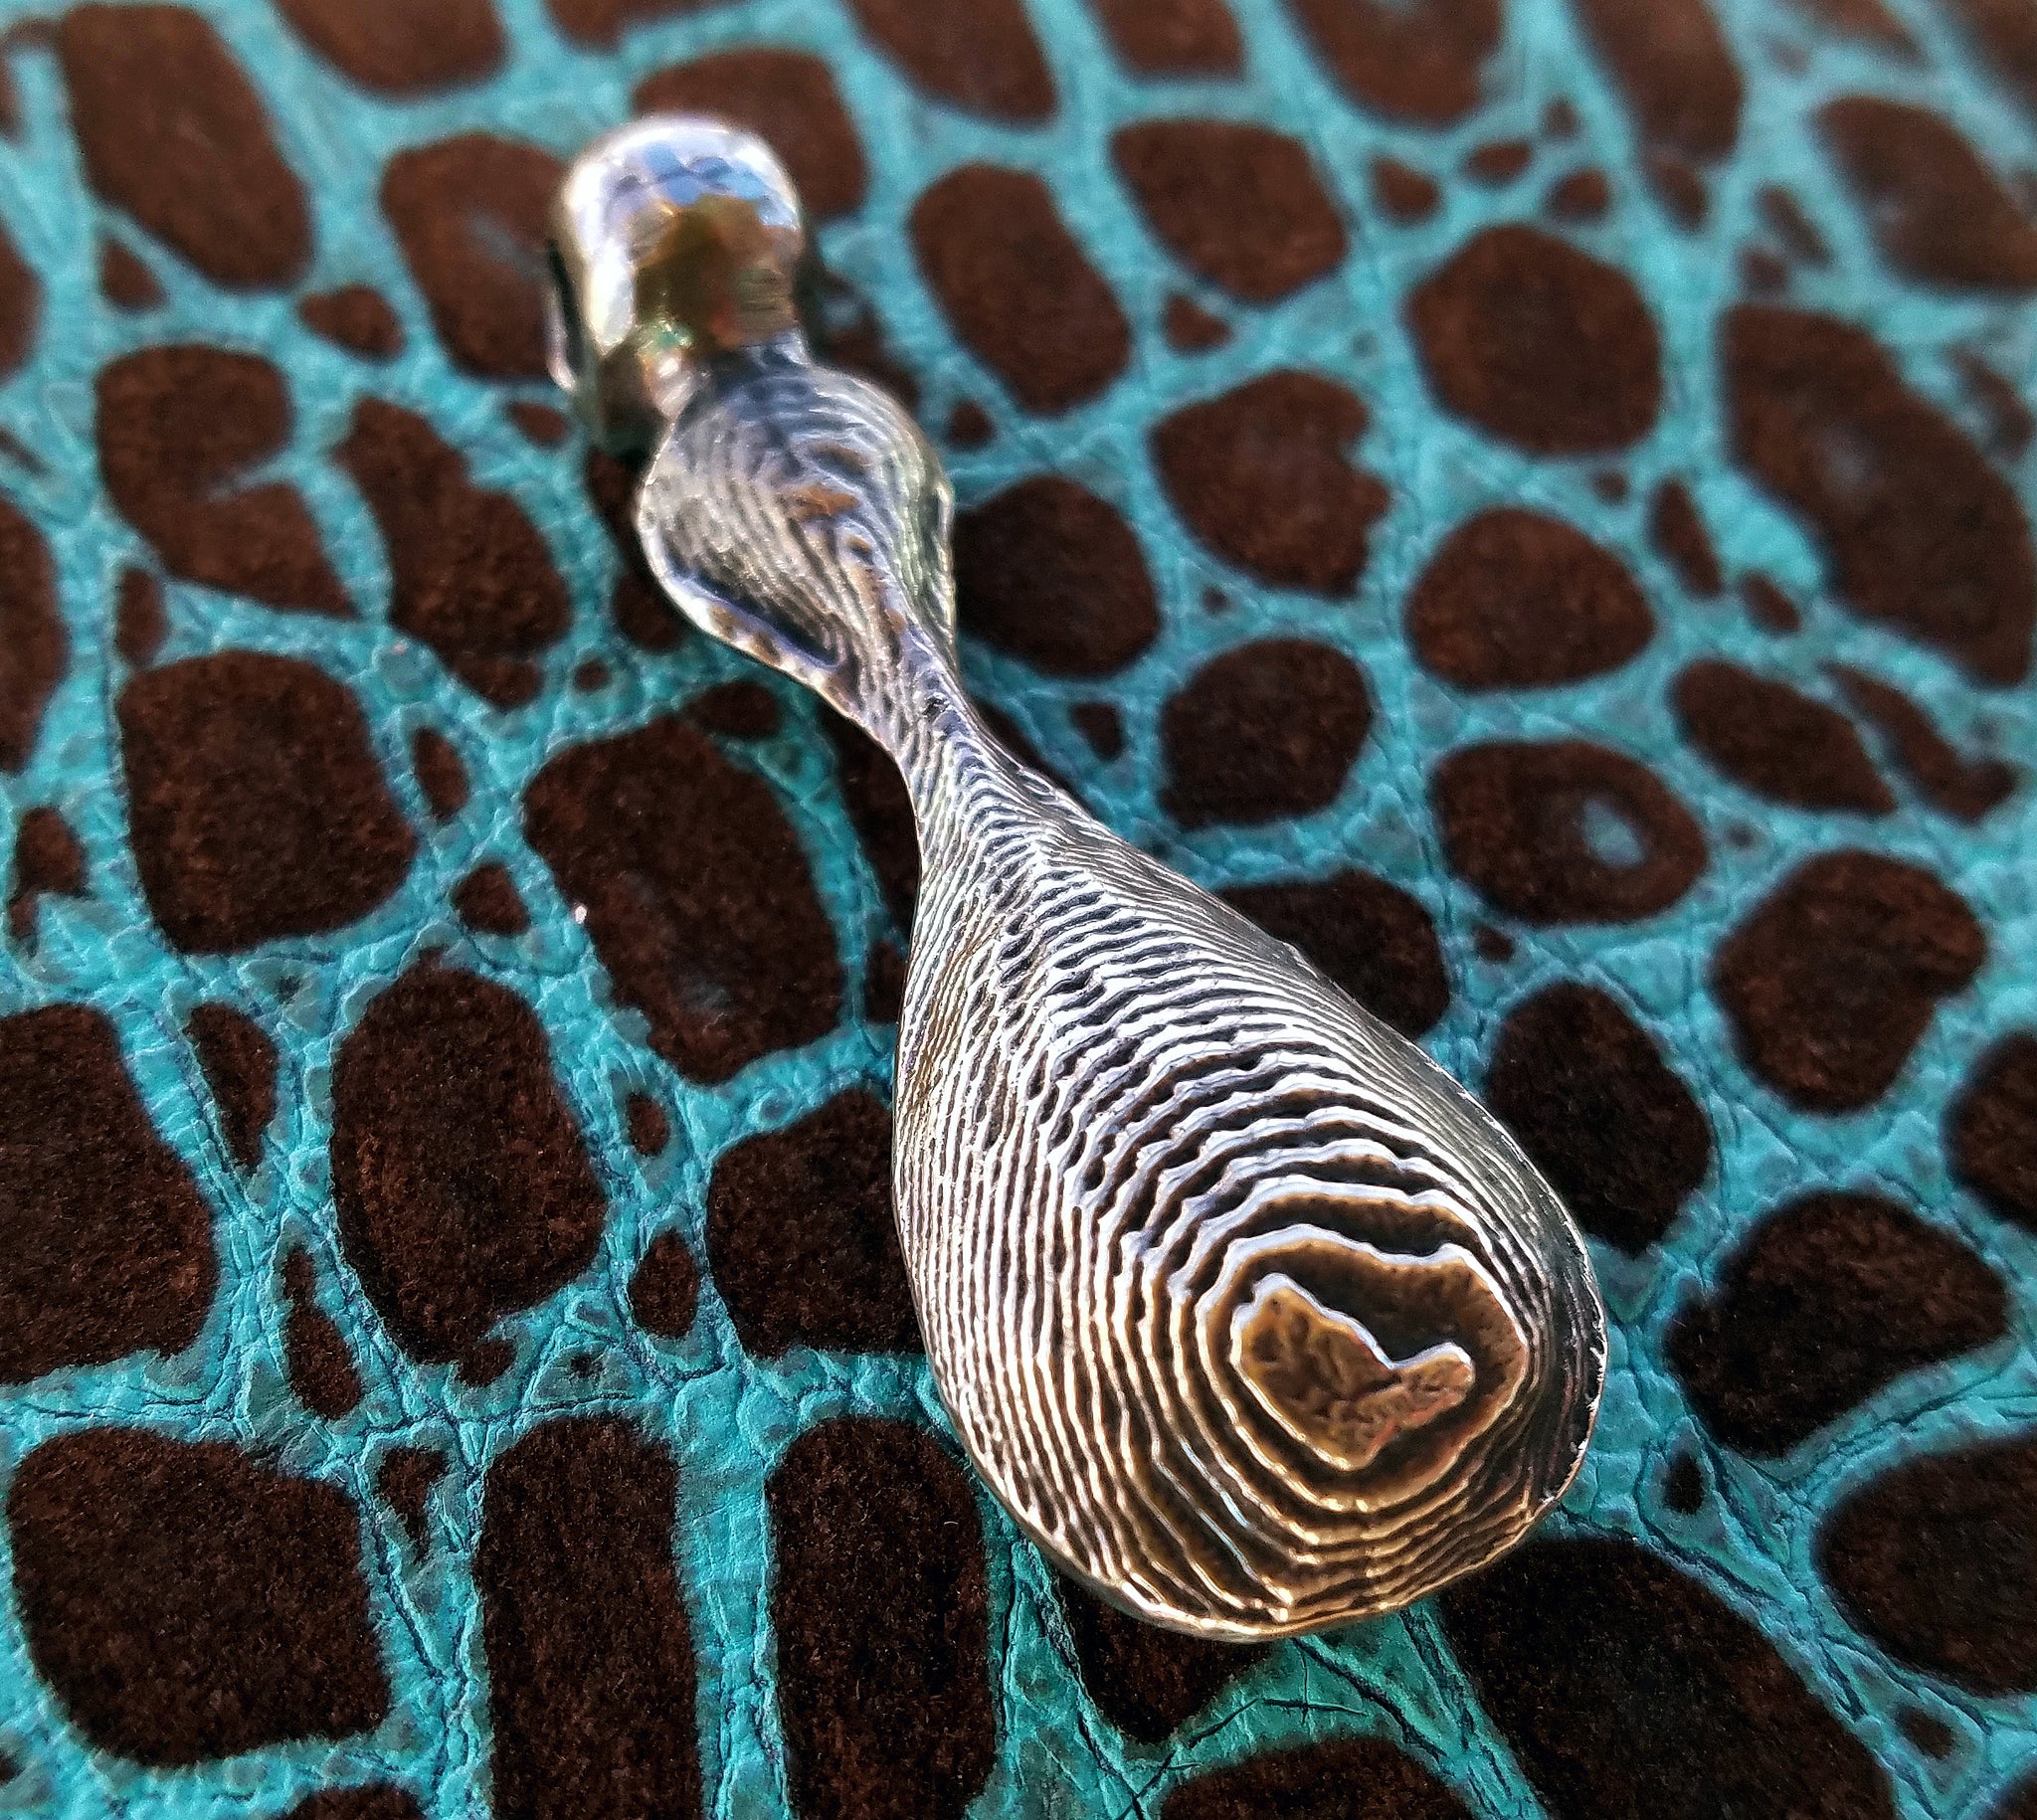 'Droplet' Hand-carved Hand-poured Cuttlefish Pendant #1 by Phantom